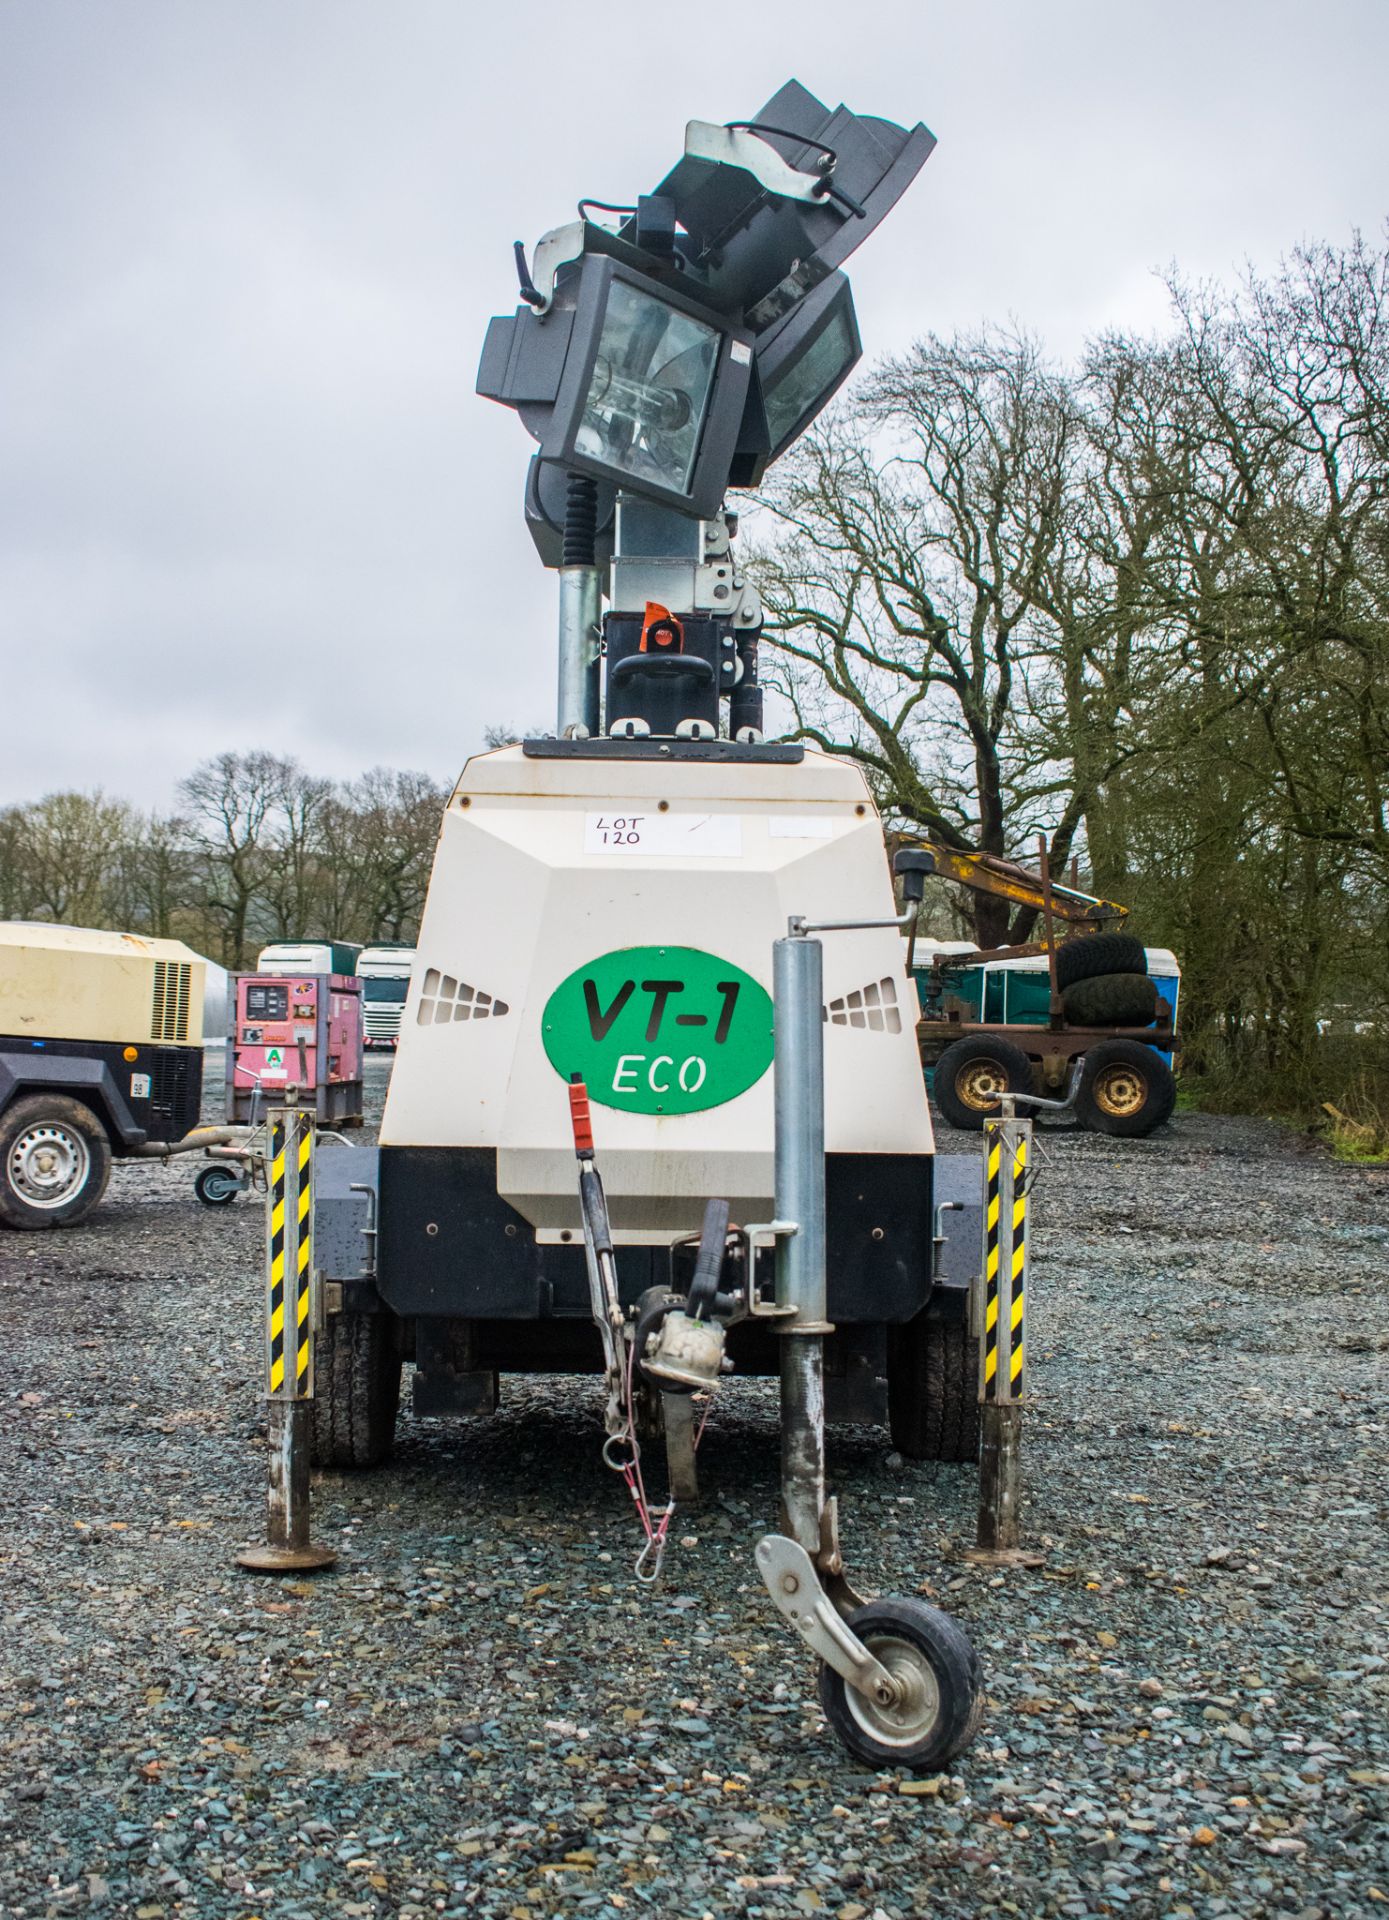 Towerlight VT-1 Eco diesel driven mobile lighting tower Year: 2014 S/N: 1404125 Recorded Hours: 4067 - Image 4 of 8